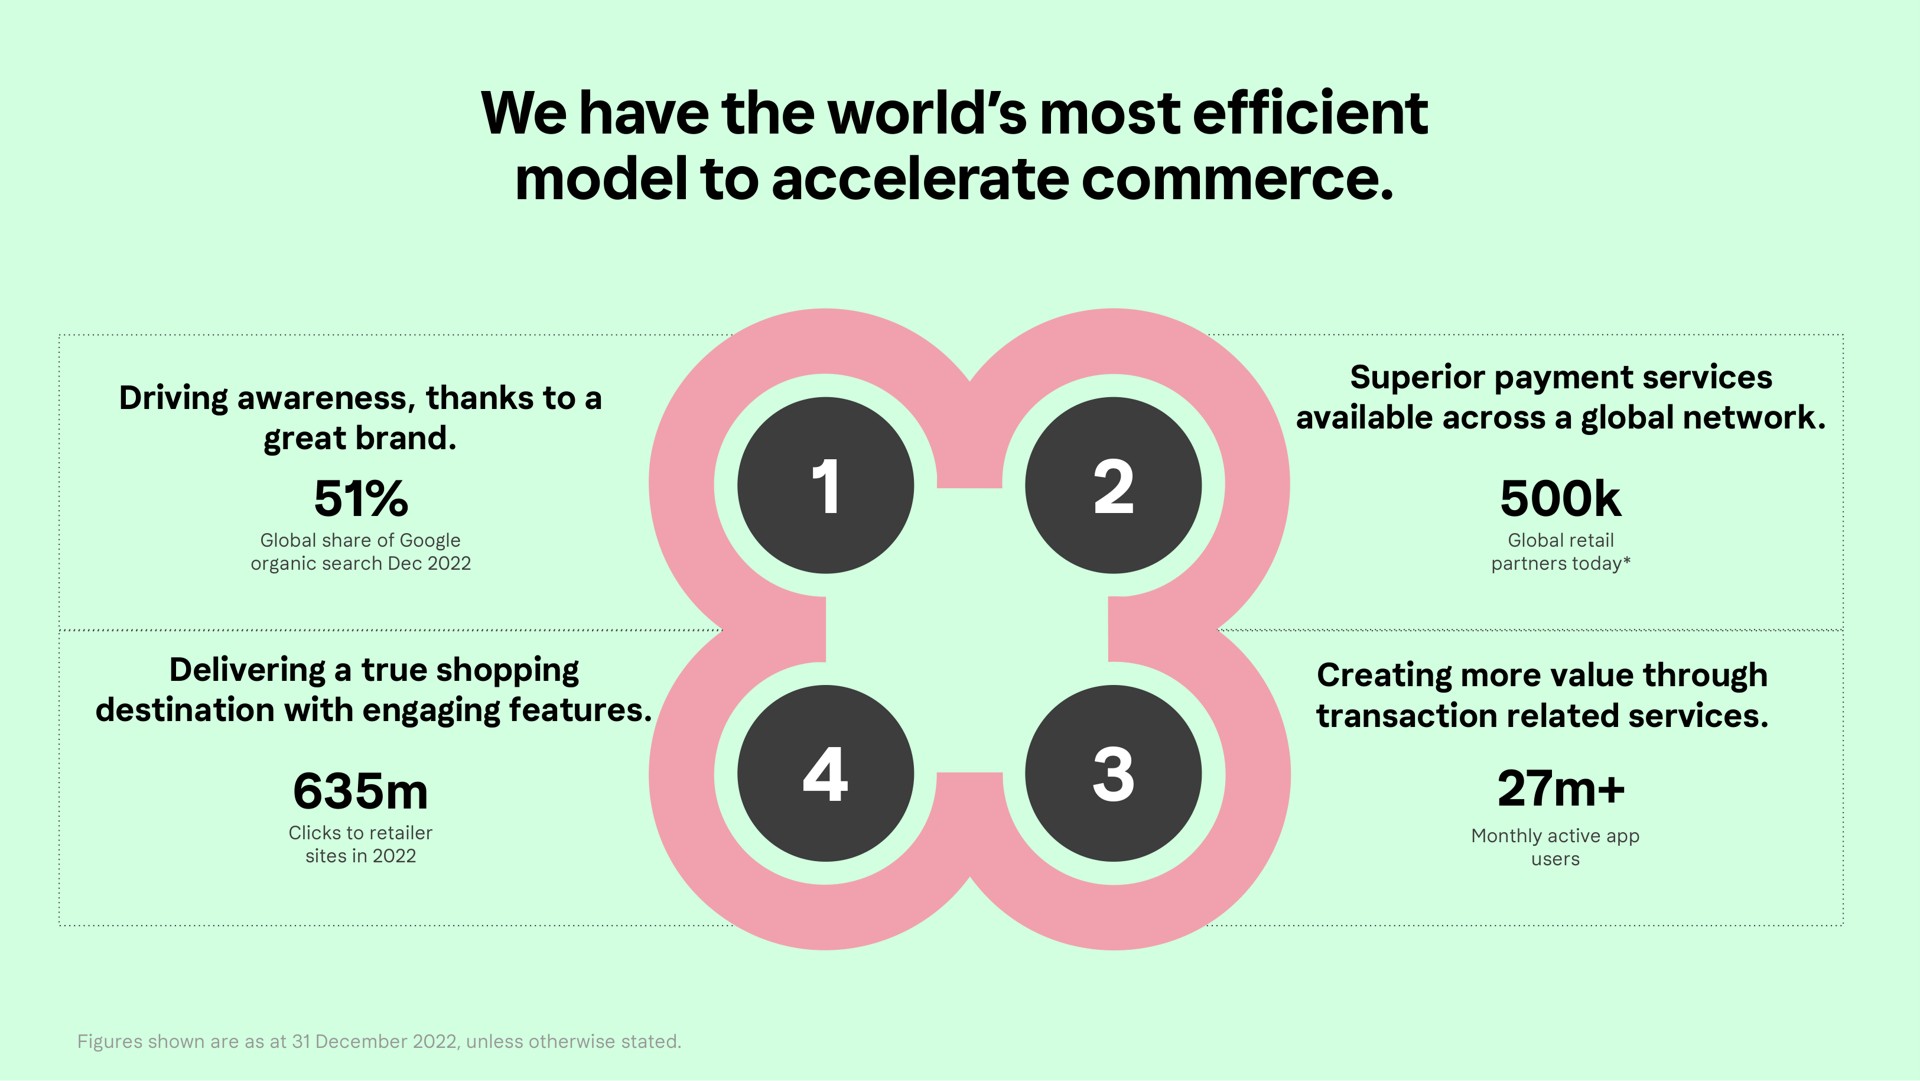 we have the world most model to accelerate commerce efficient | Klarna